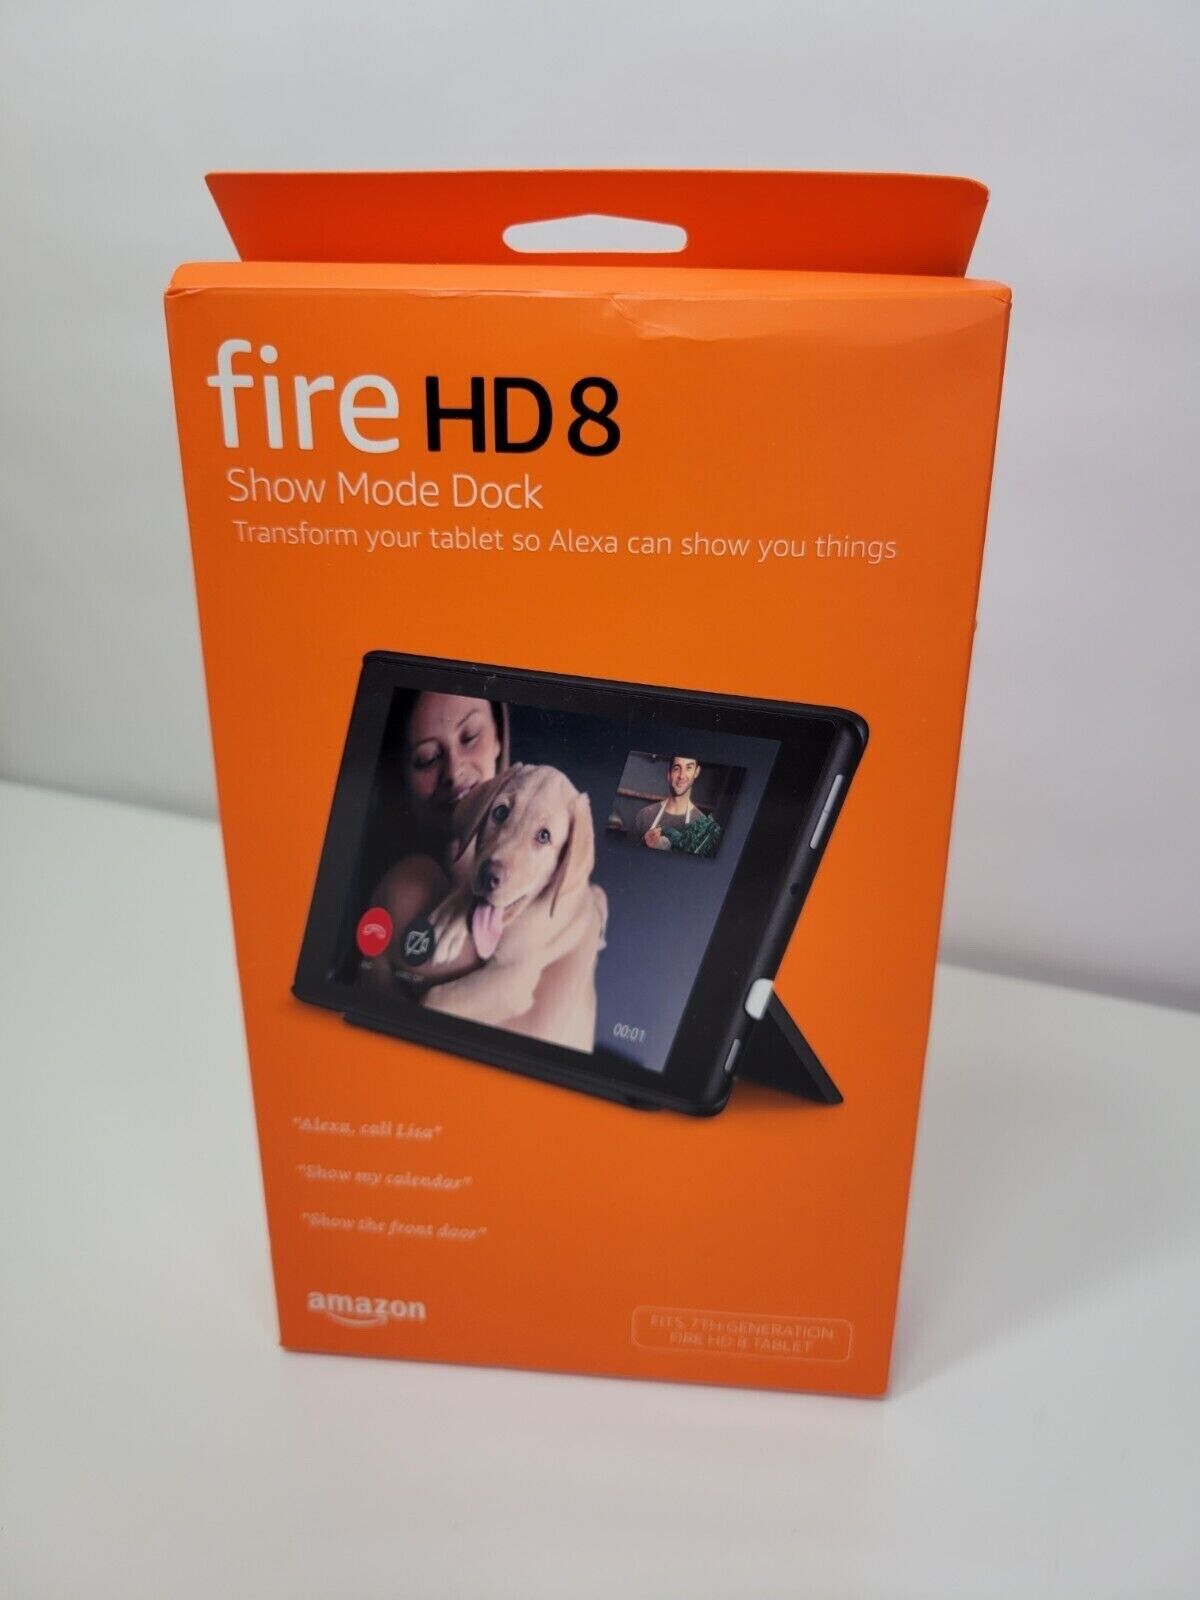 BRAND NEW Amazon Fire HD 8 Show Mode Dock for 7th Gen Fire HD 8 Tablet